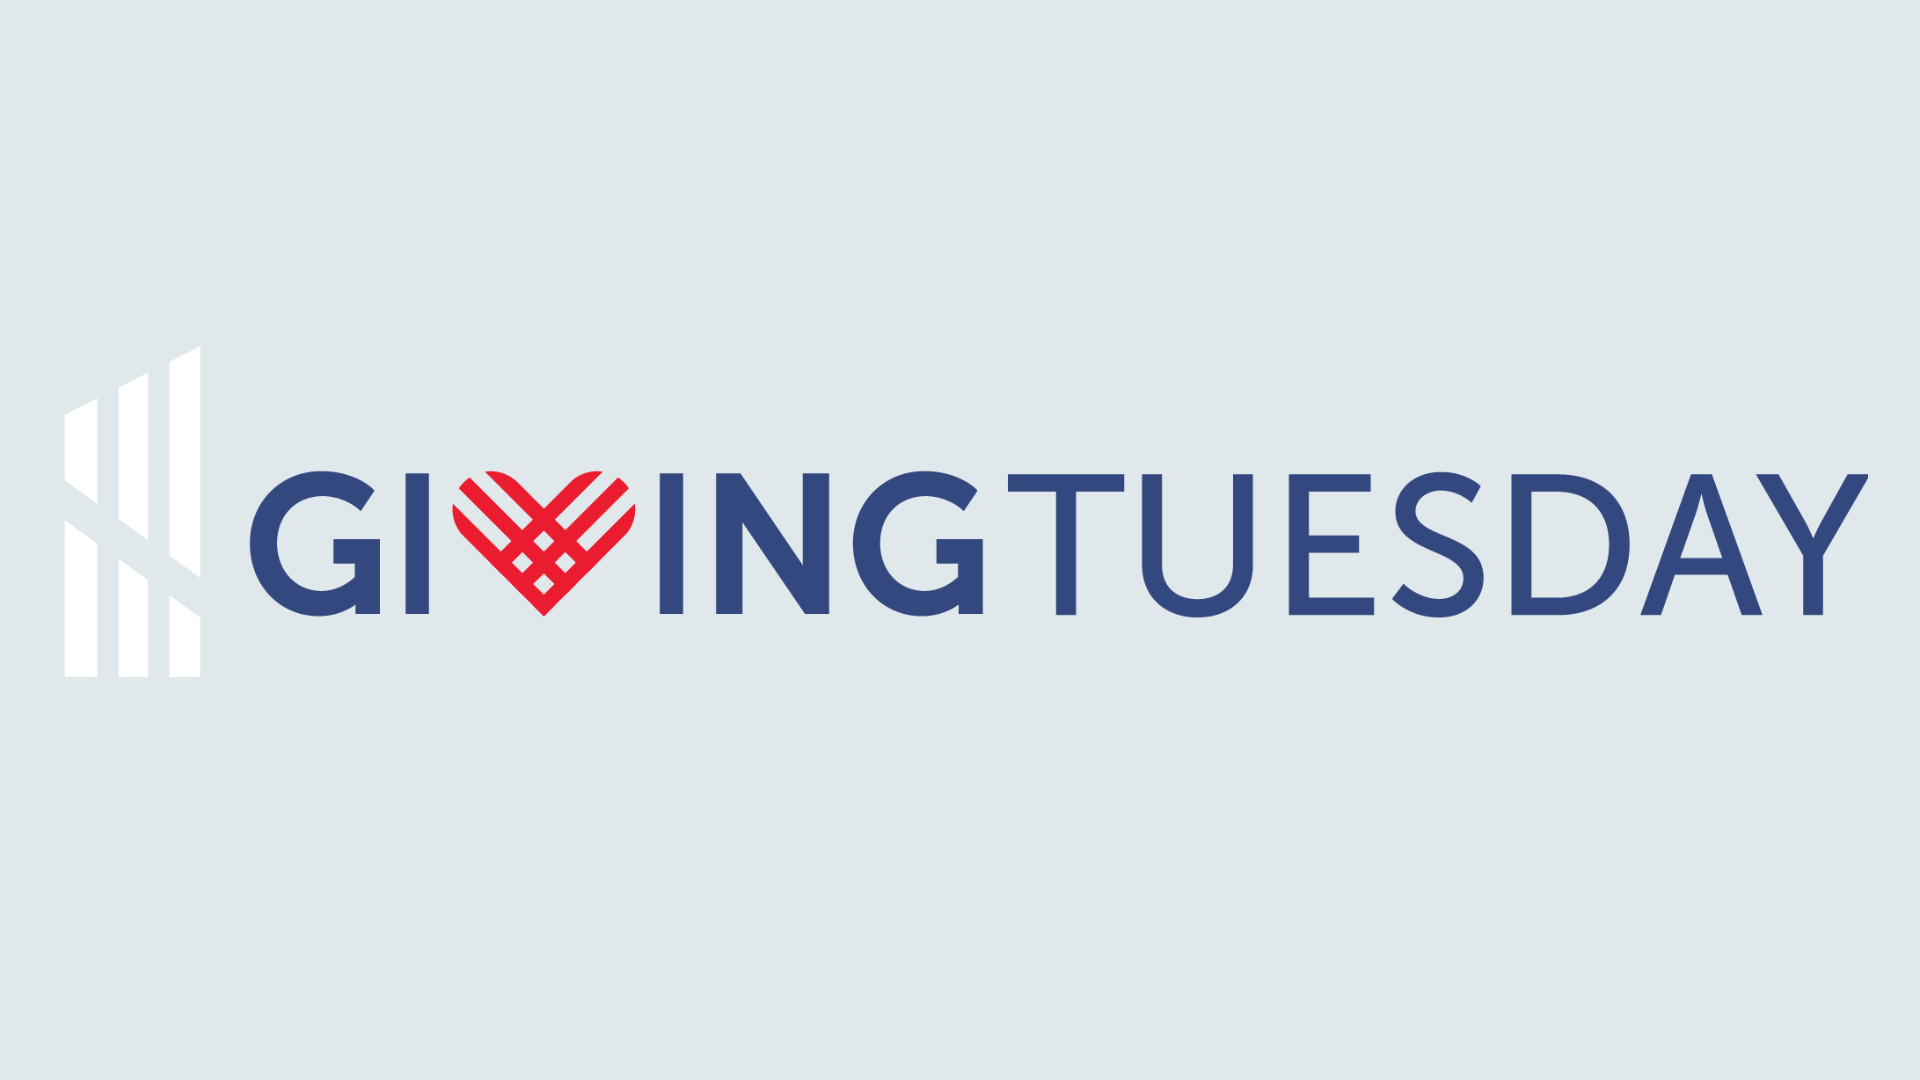 graphic - Giving Tuesday